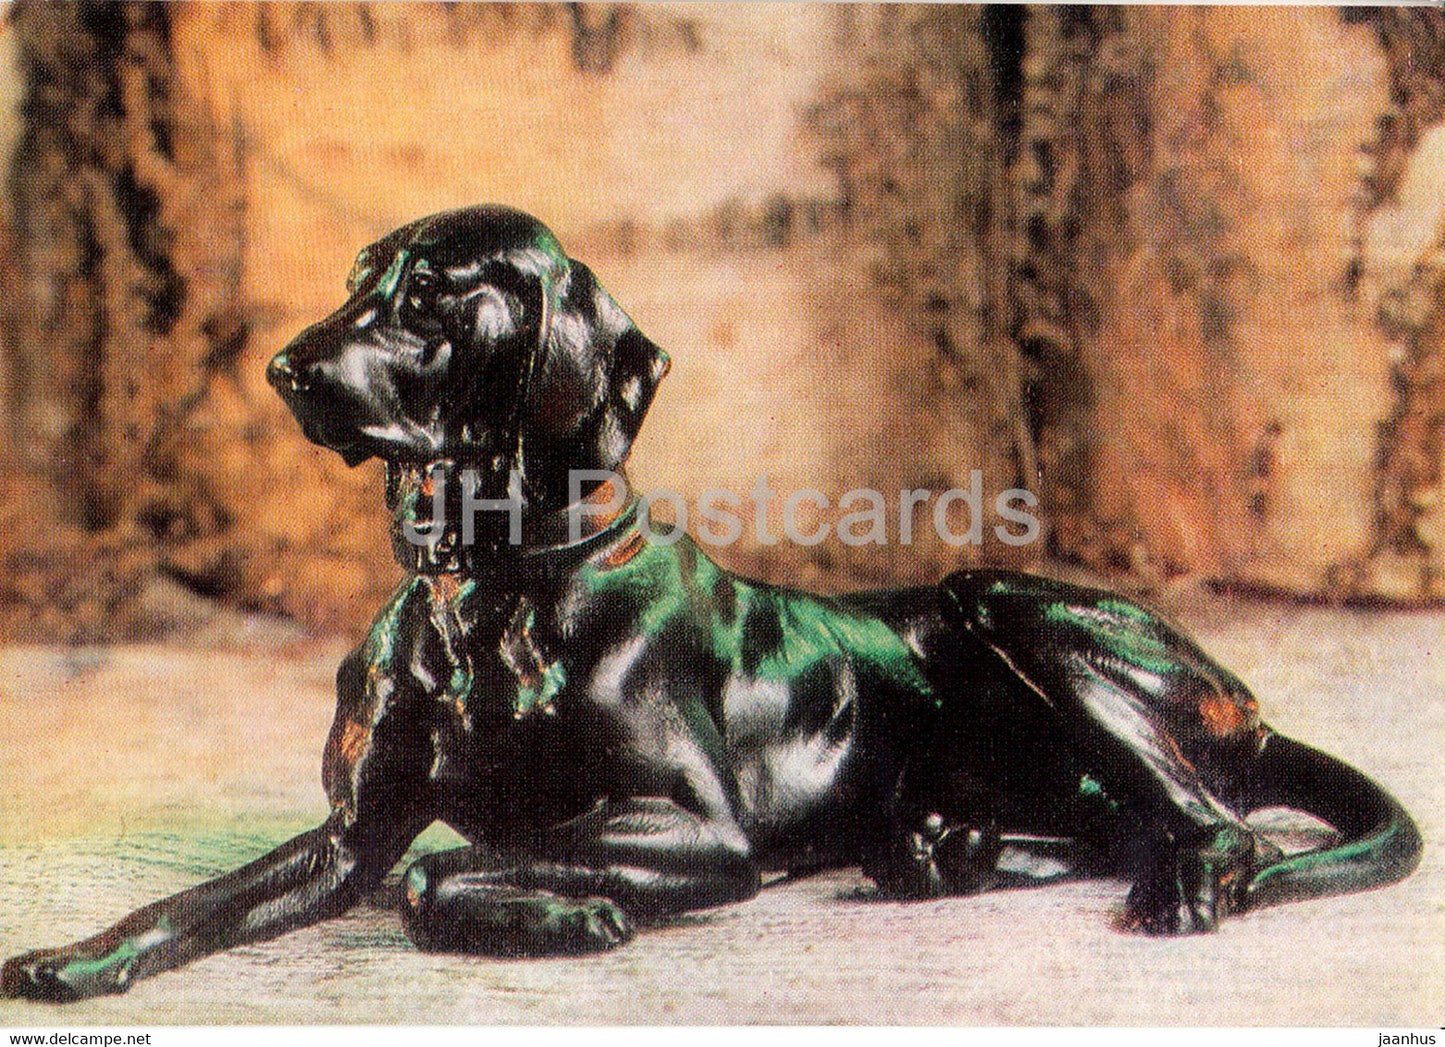 A Dog - cast iron - Products of the Kasli Masters - 1976 - Russia USSR - unused - JH Postcards